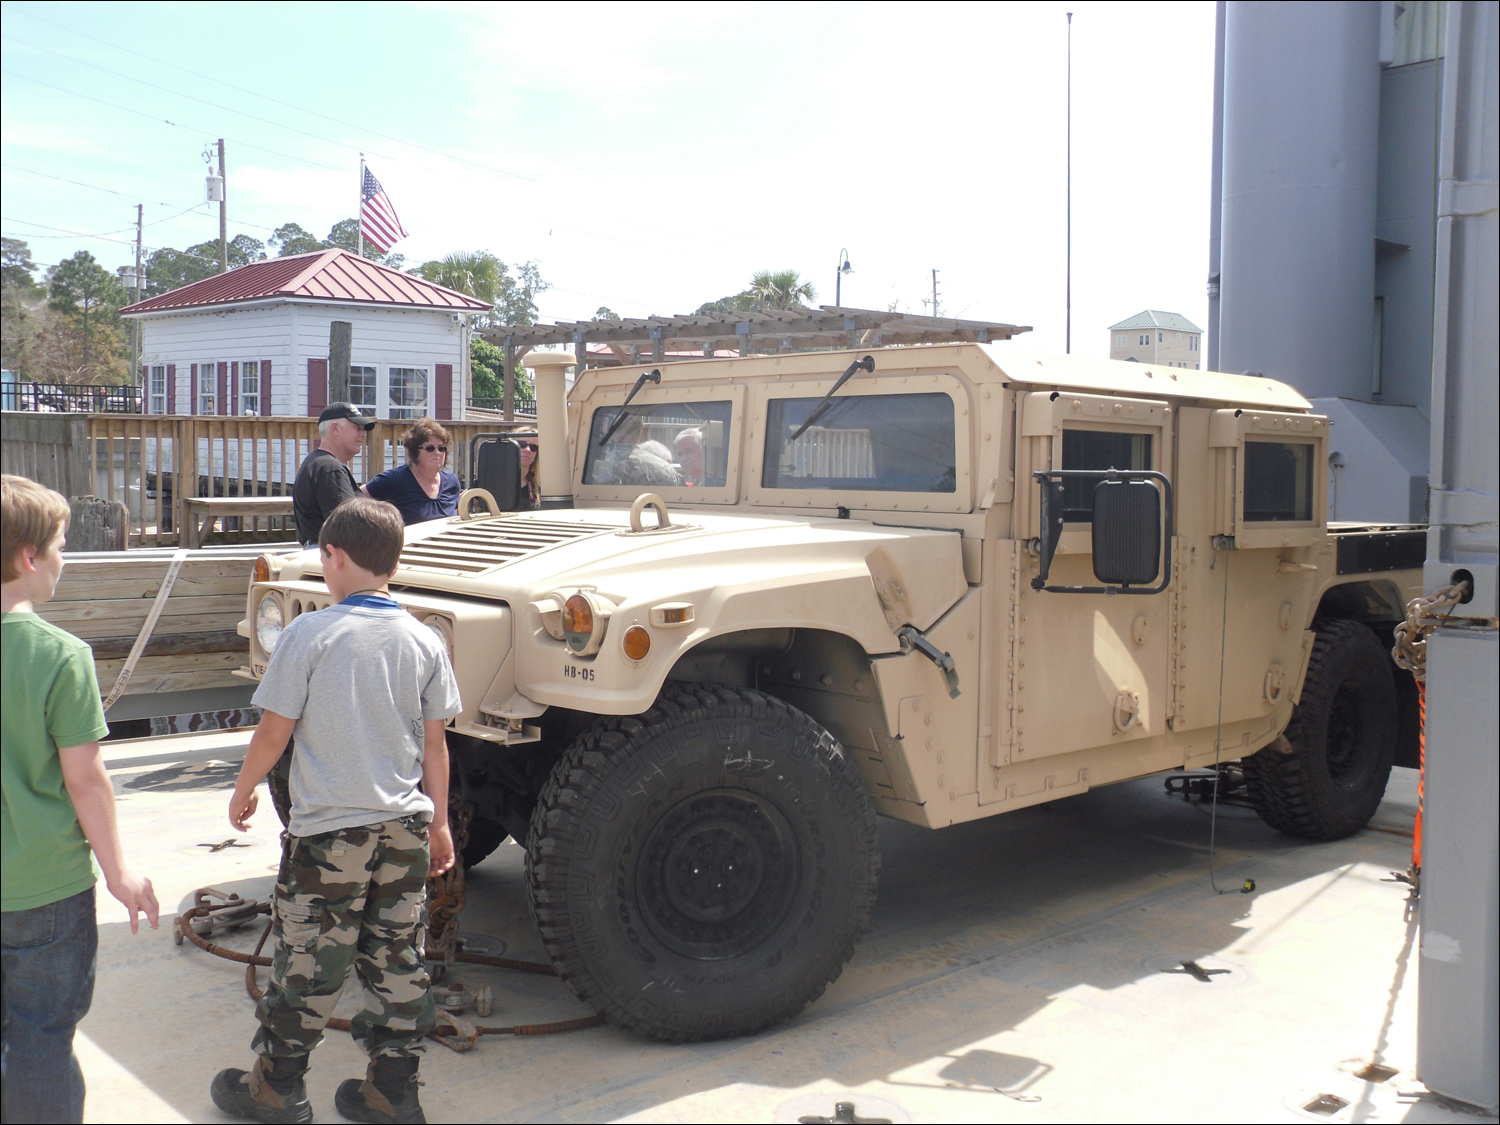 Humvee's aboard the US Army LCU (Landing Craft Unit) New Orleans